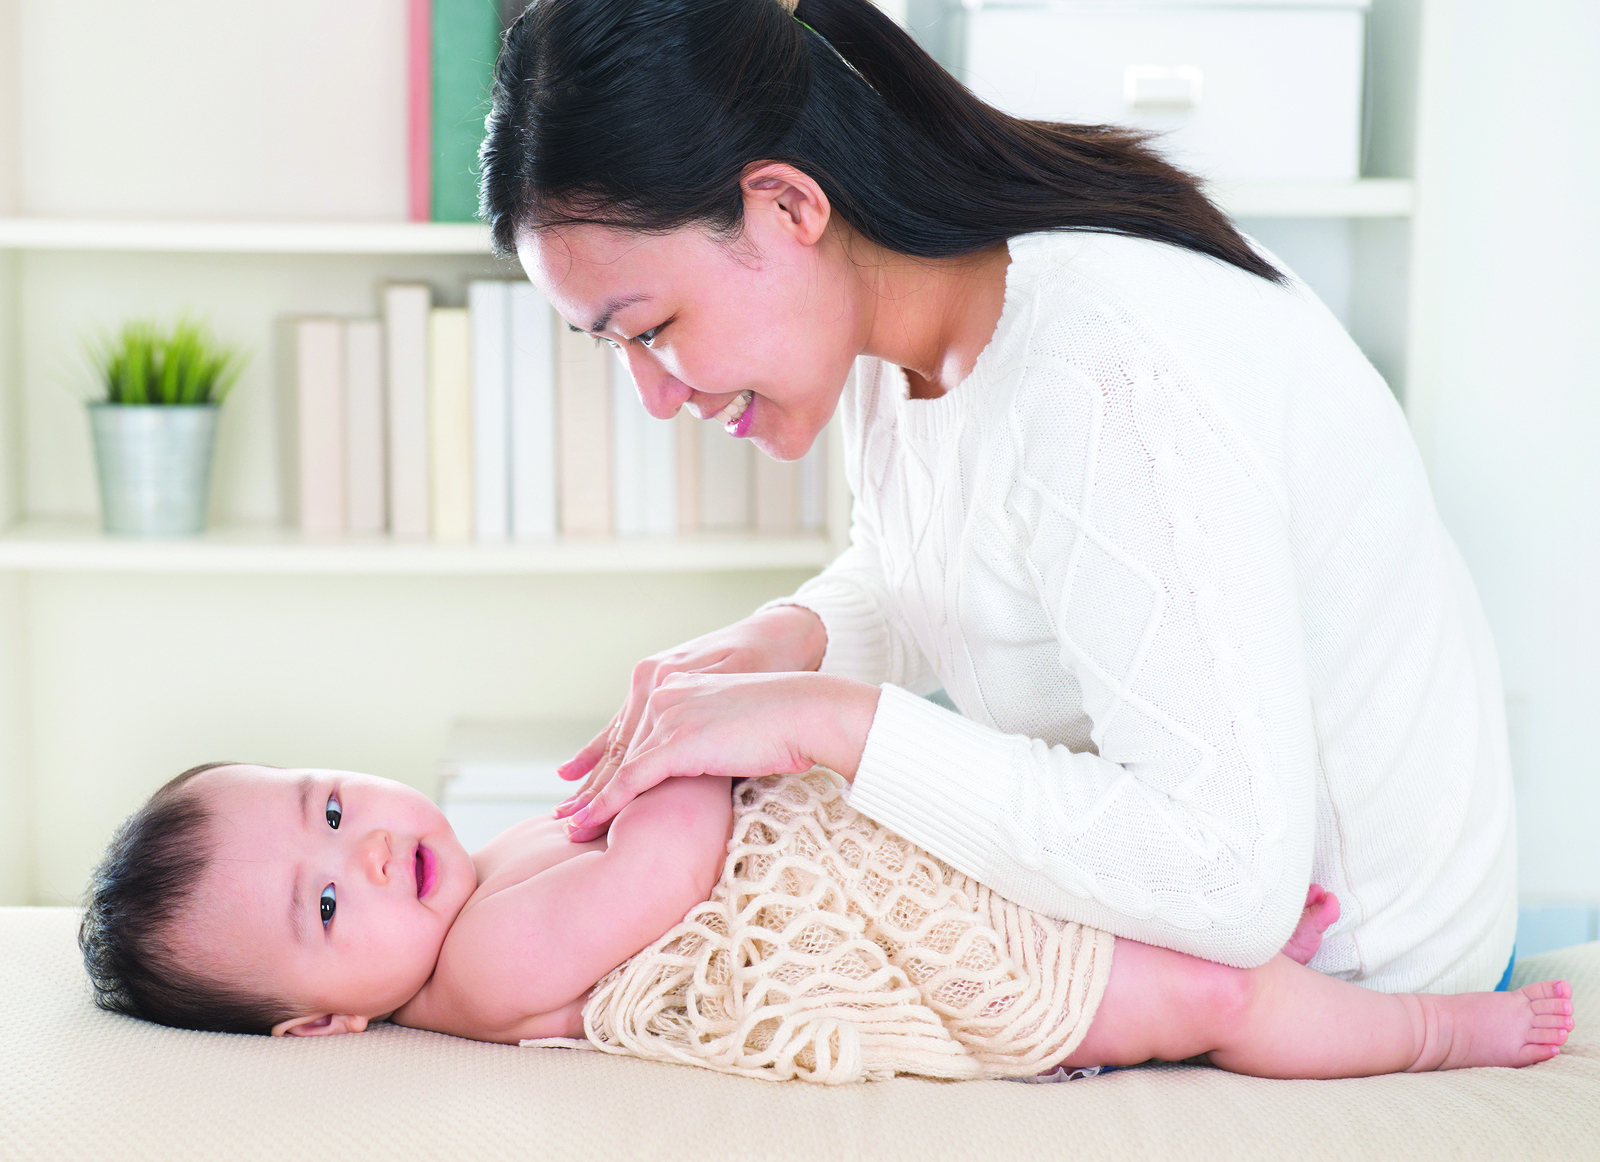 Asian mother giving massage to baby girl at home.